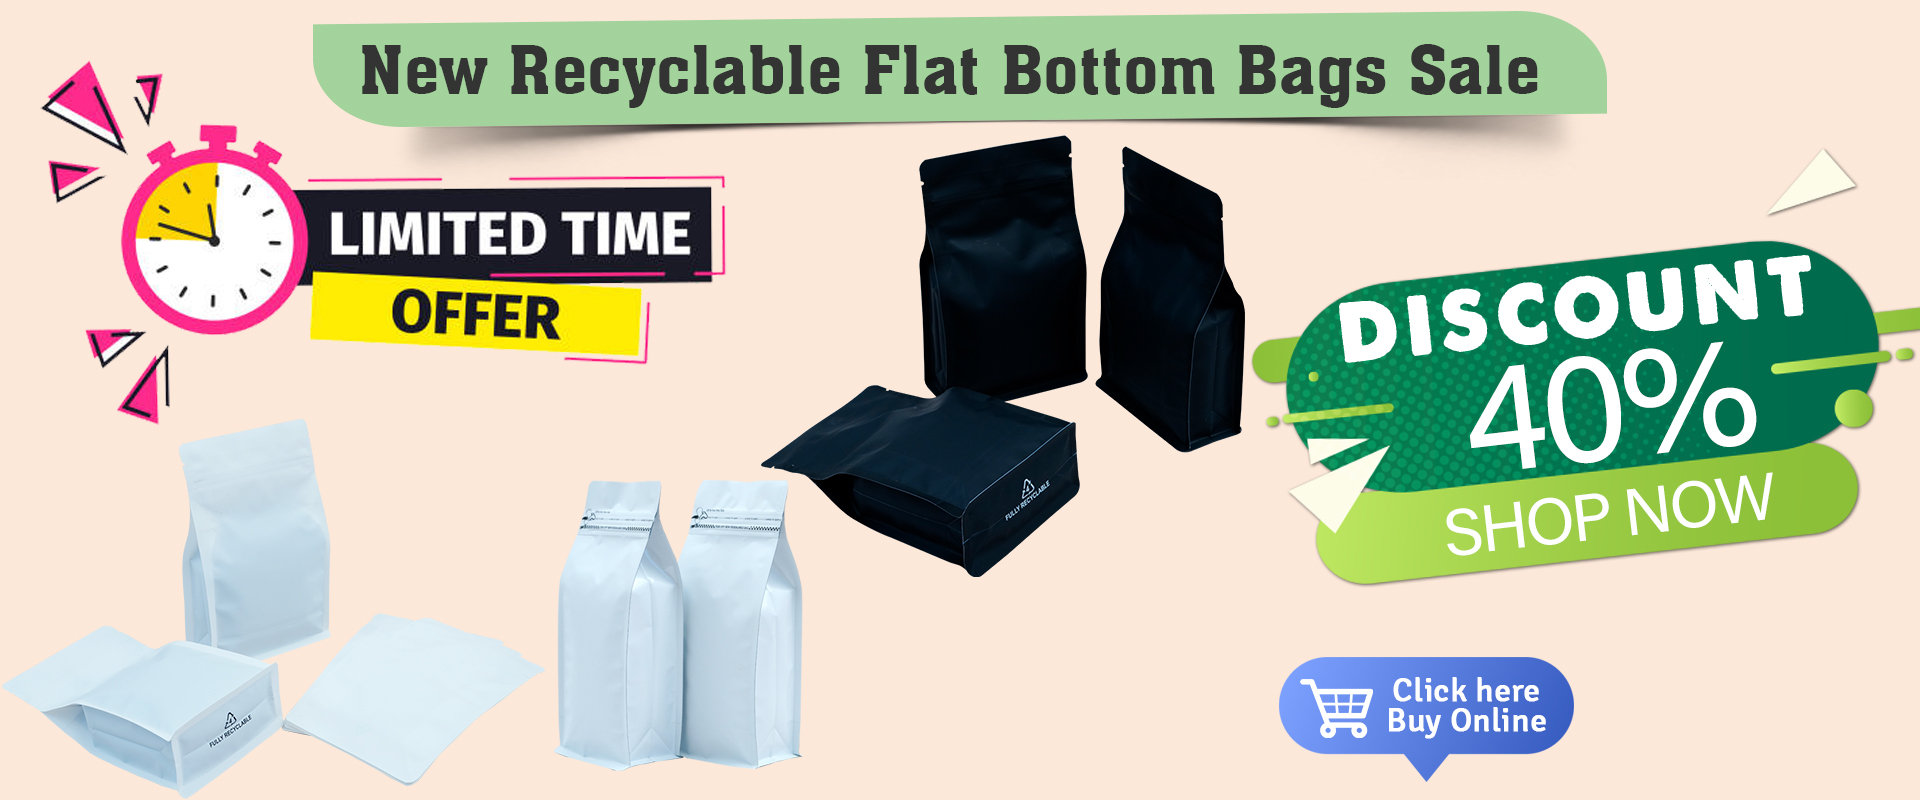 RECYCLABLE FLAT BOTTOM POUCHES